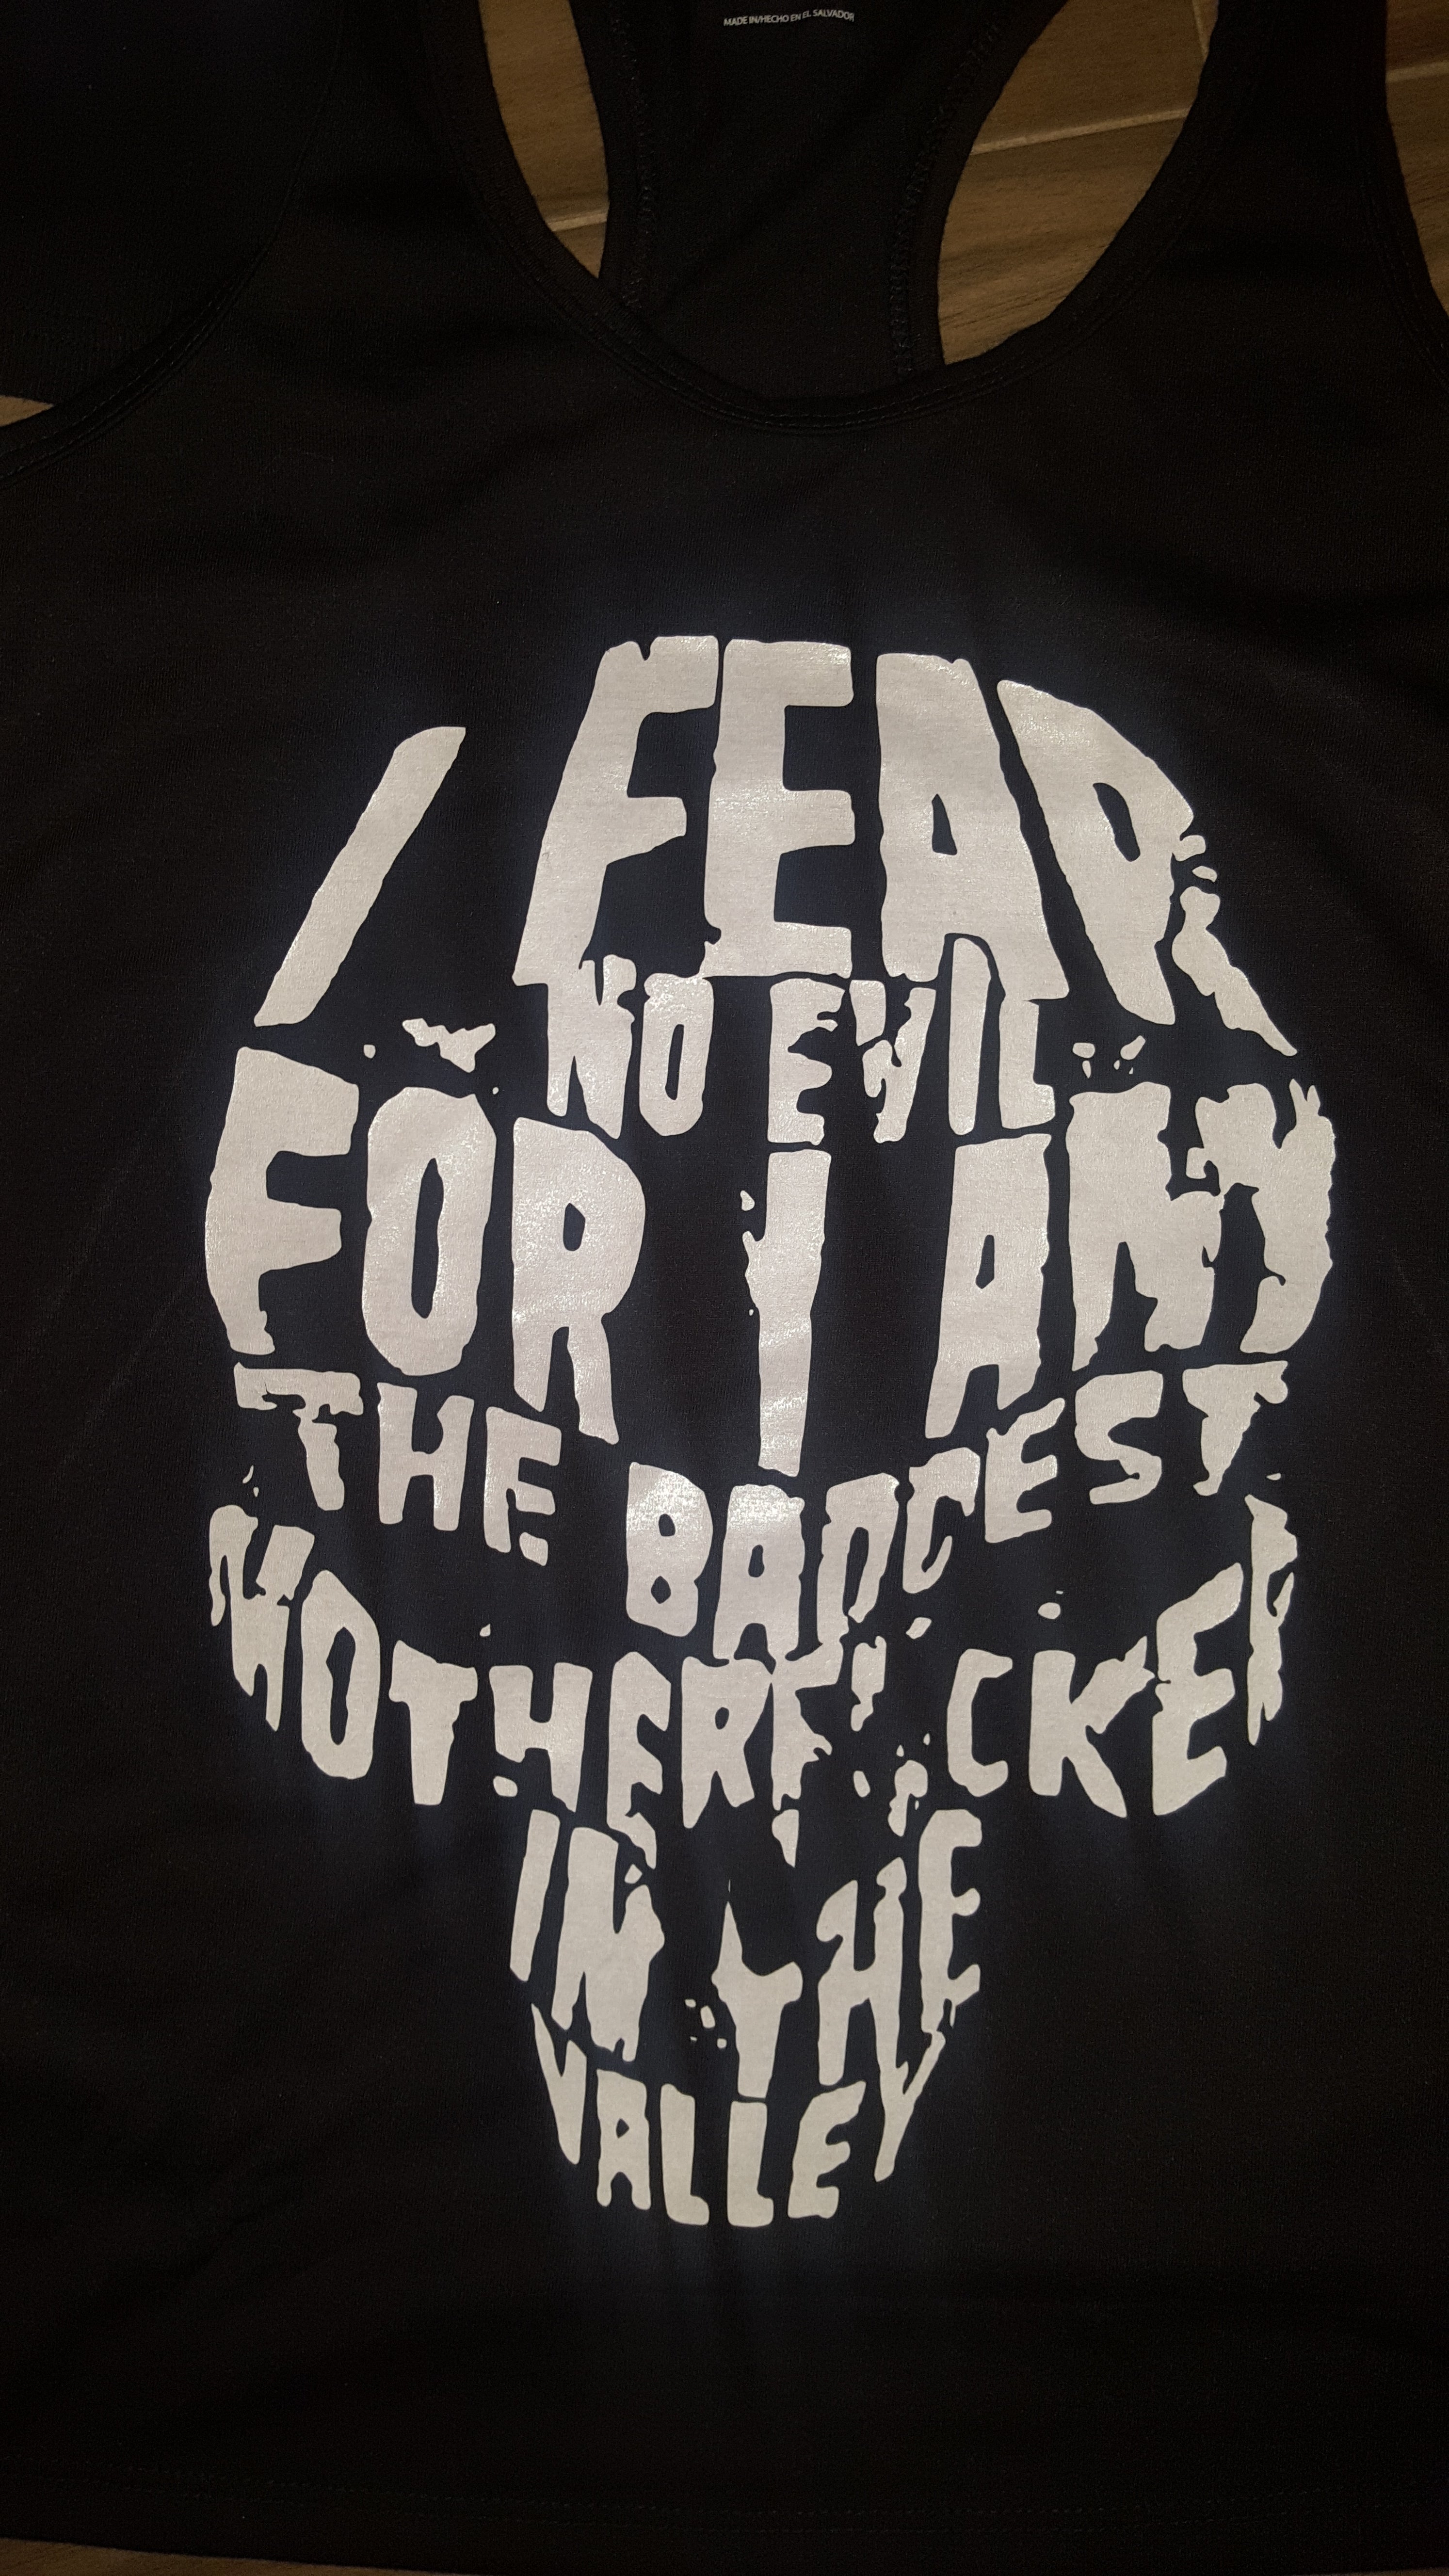 I Fear No Evil For I am the Baddest Motherfucker in the Valley Shirt